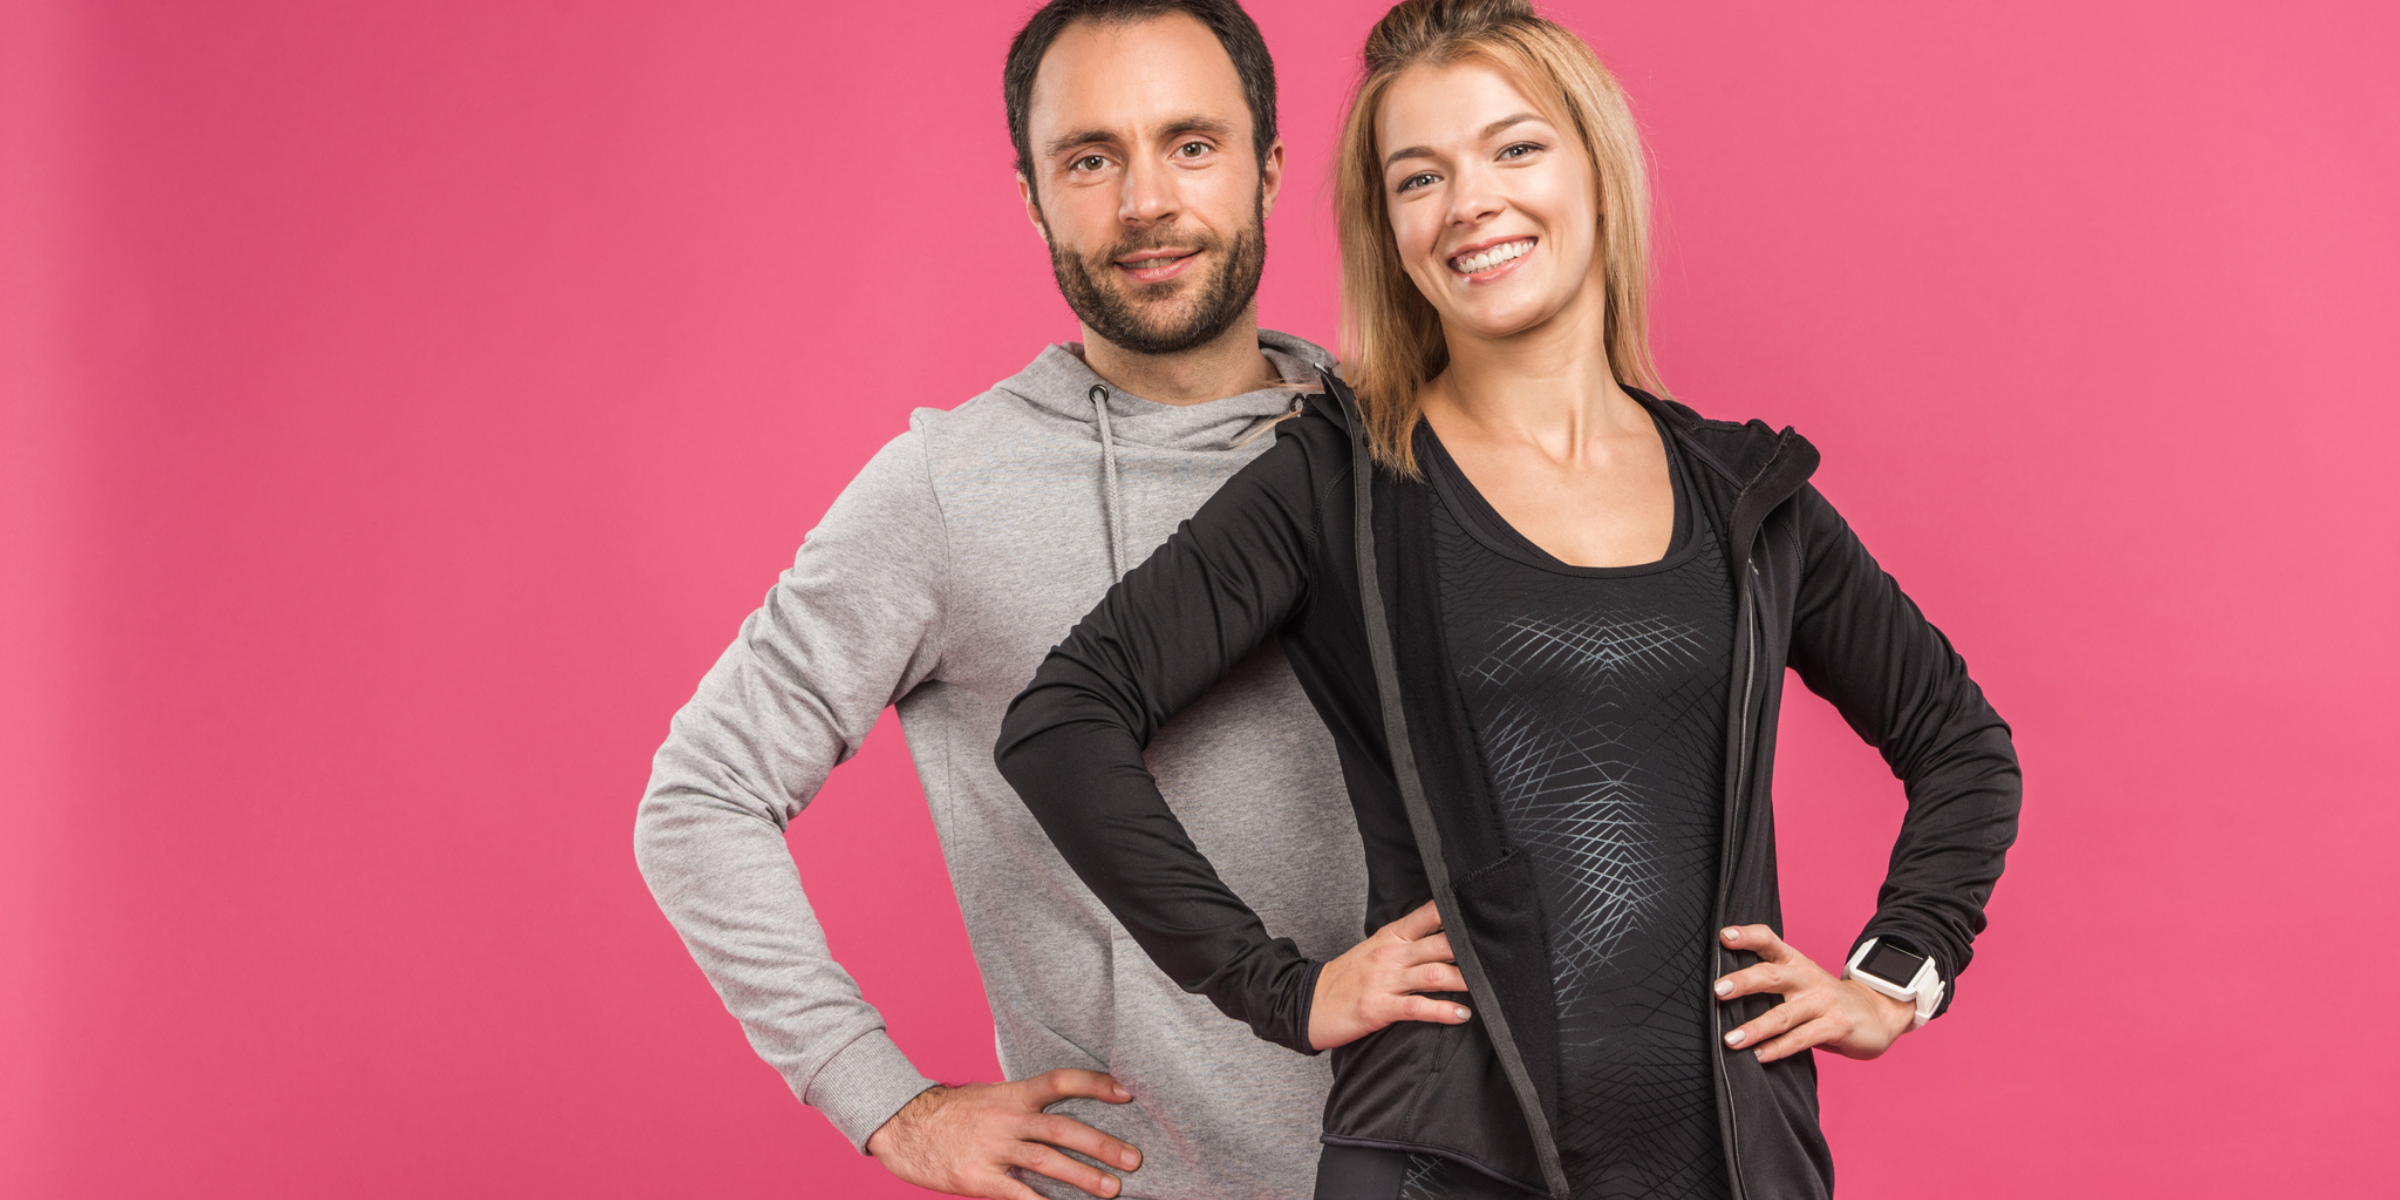 A couple posing on a pink background.